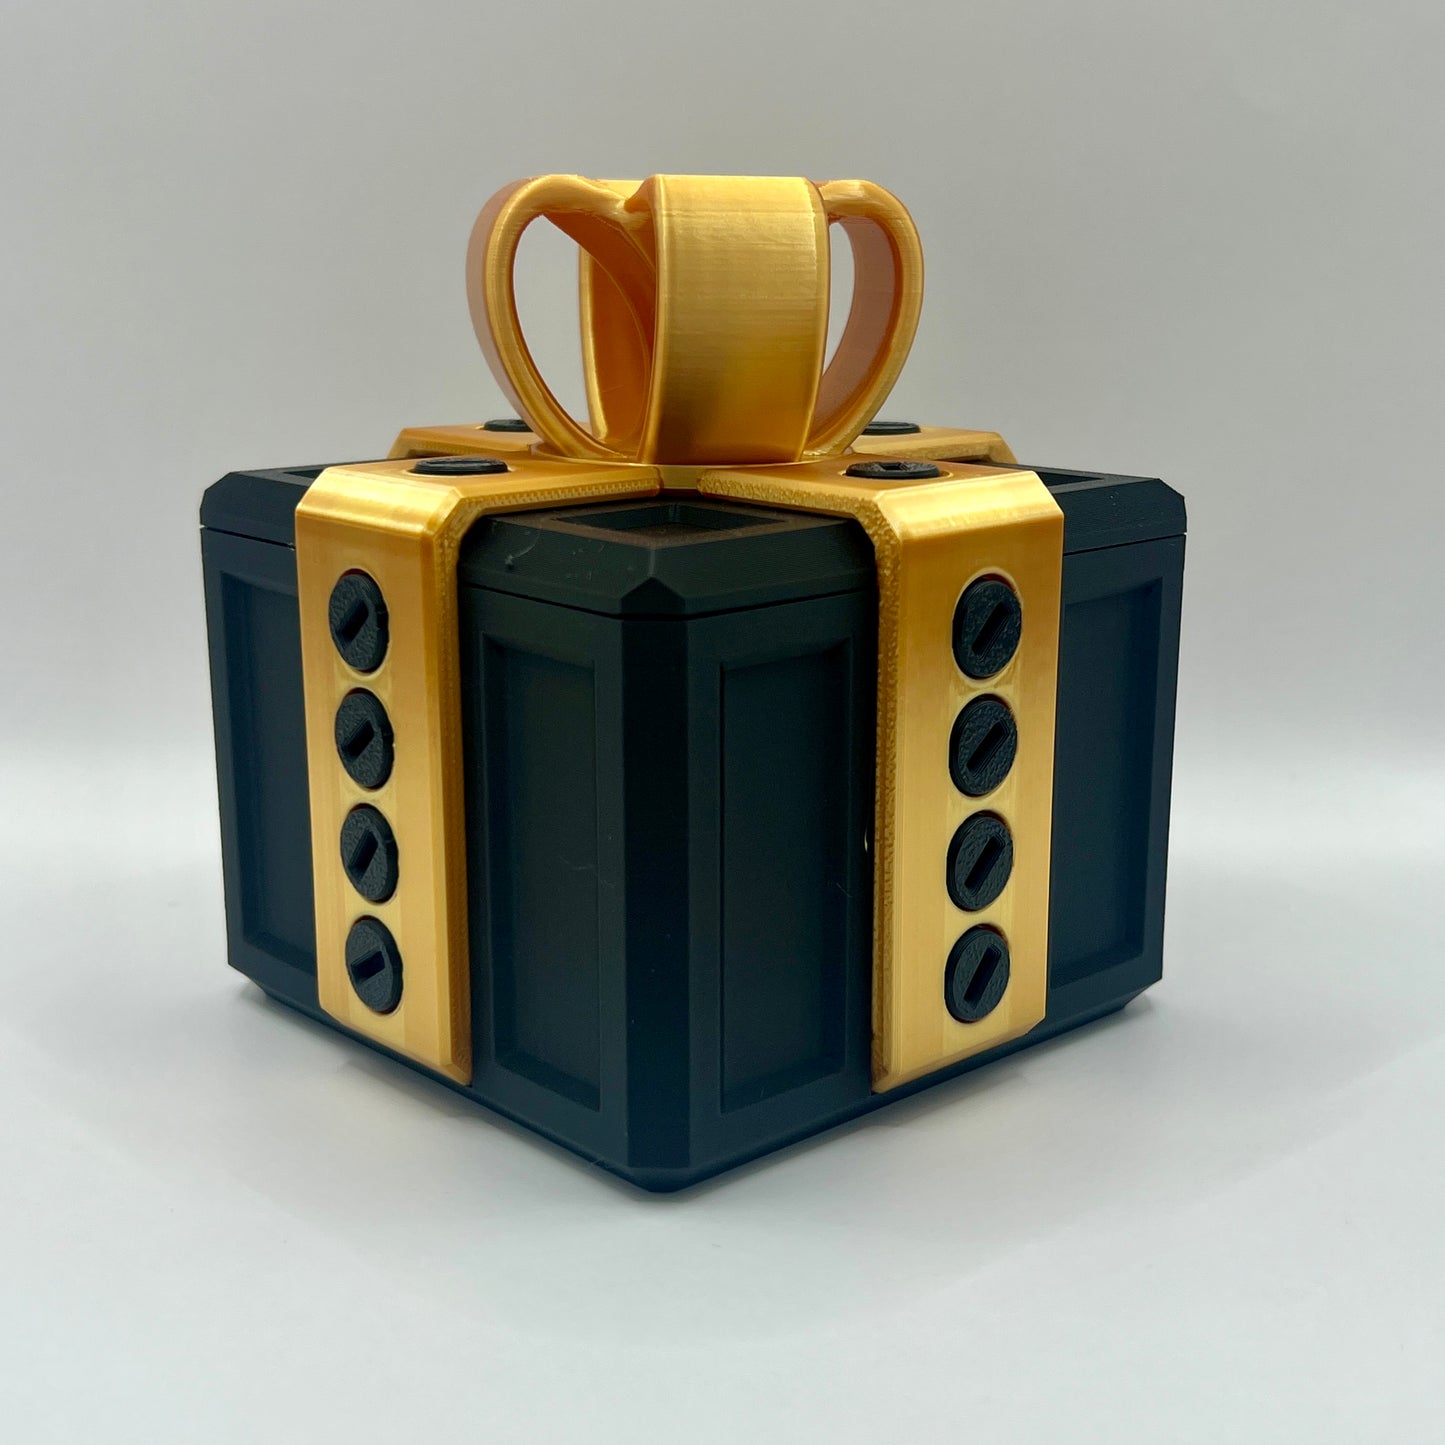 The Annoying Gift Box with 20 Bolts and a hidden key!